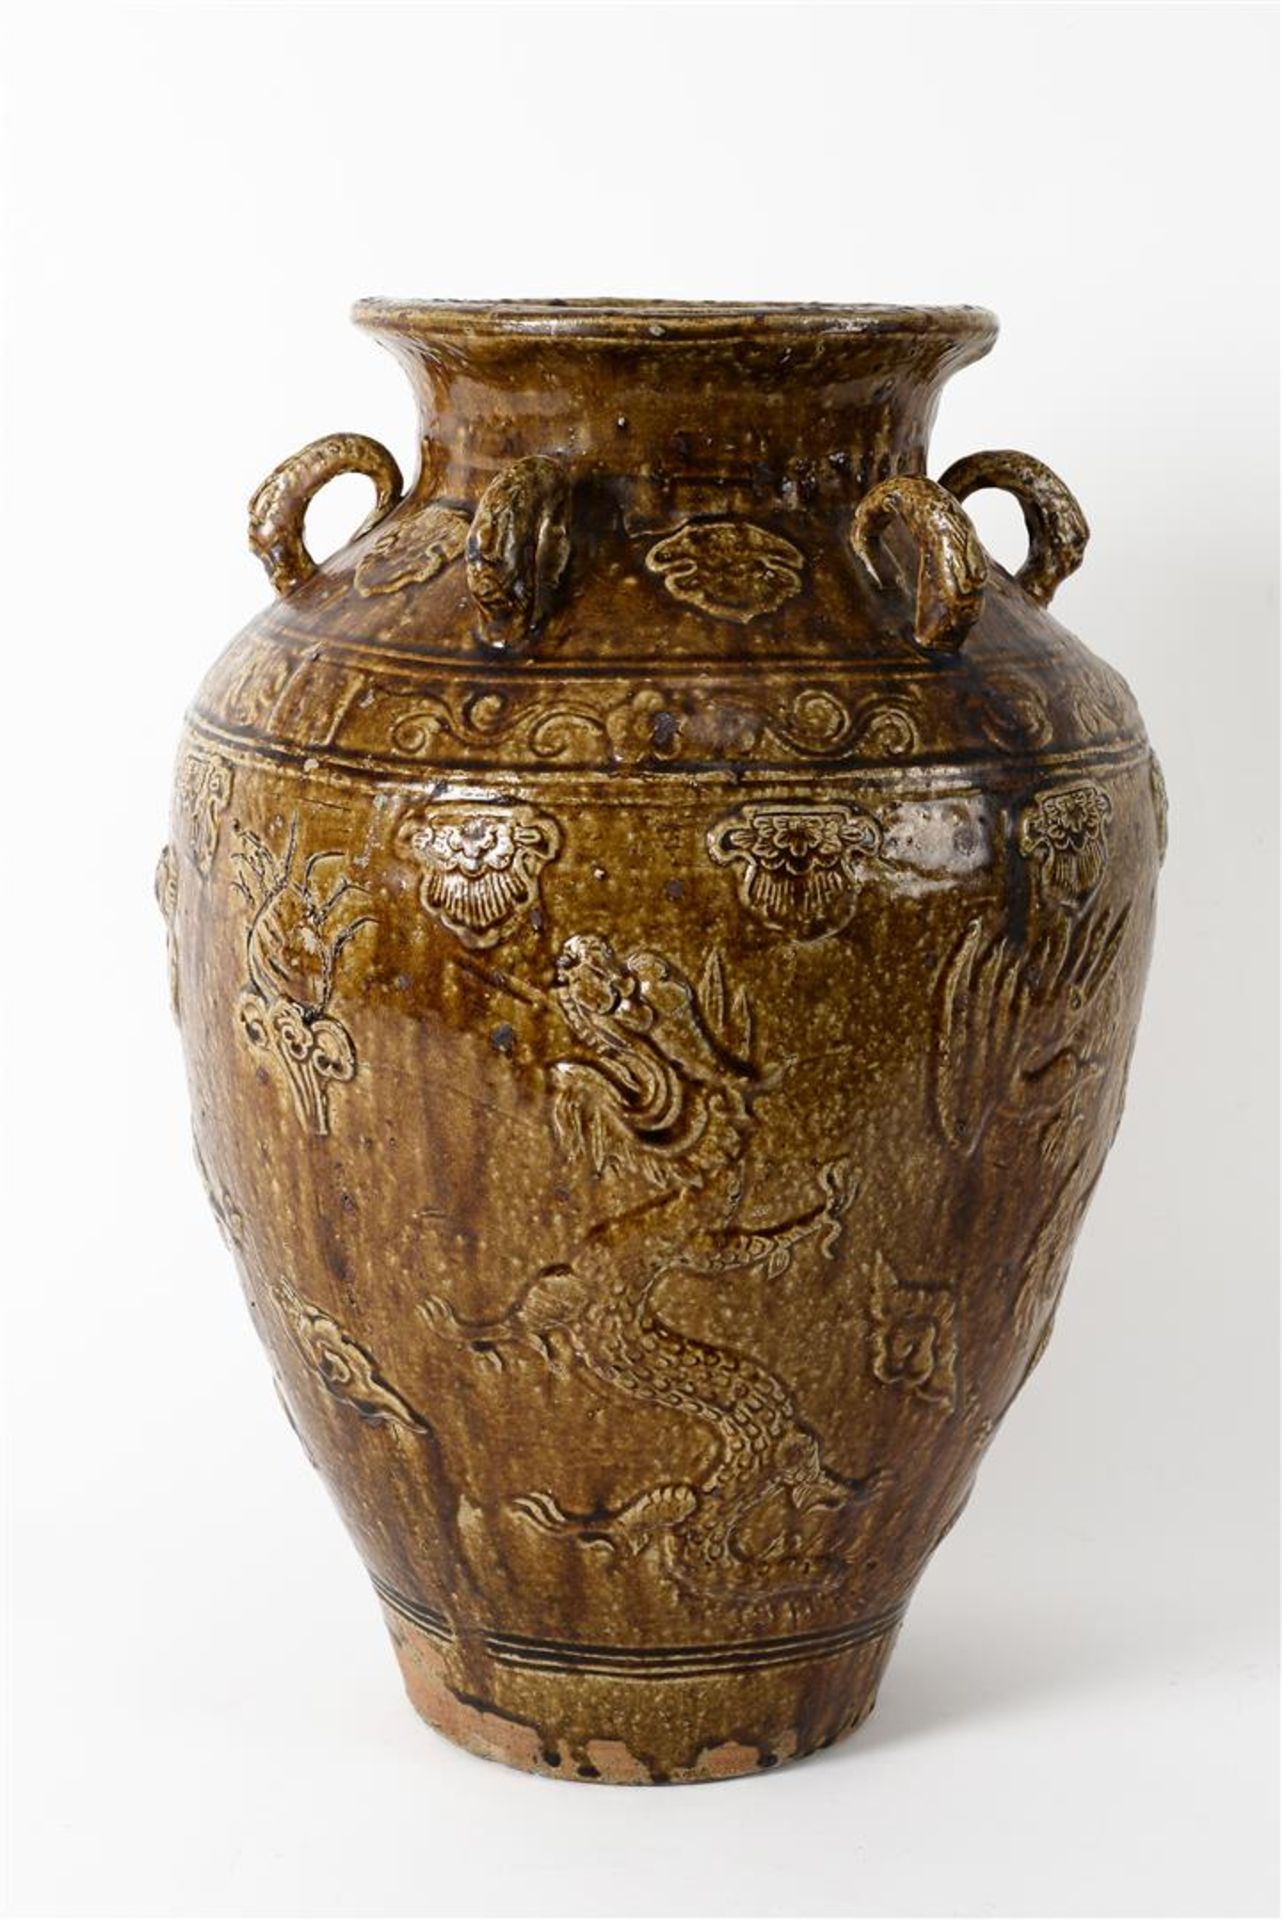 A glazed pottery martaban jar with six rings, decorated in relief with dragons and flowers. - Image 2 of 6